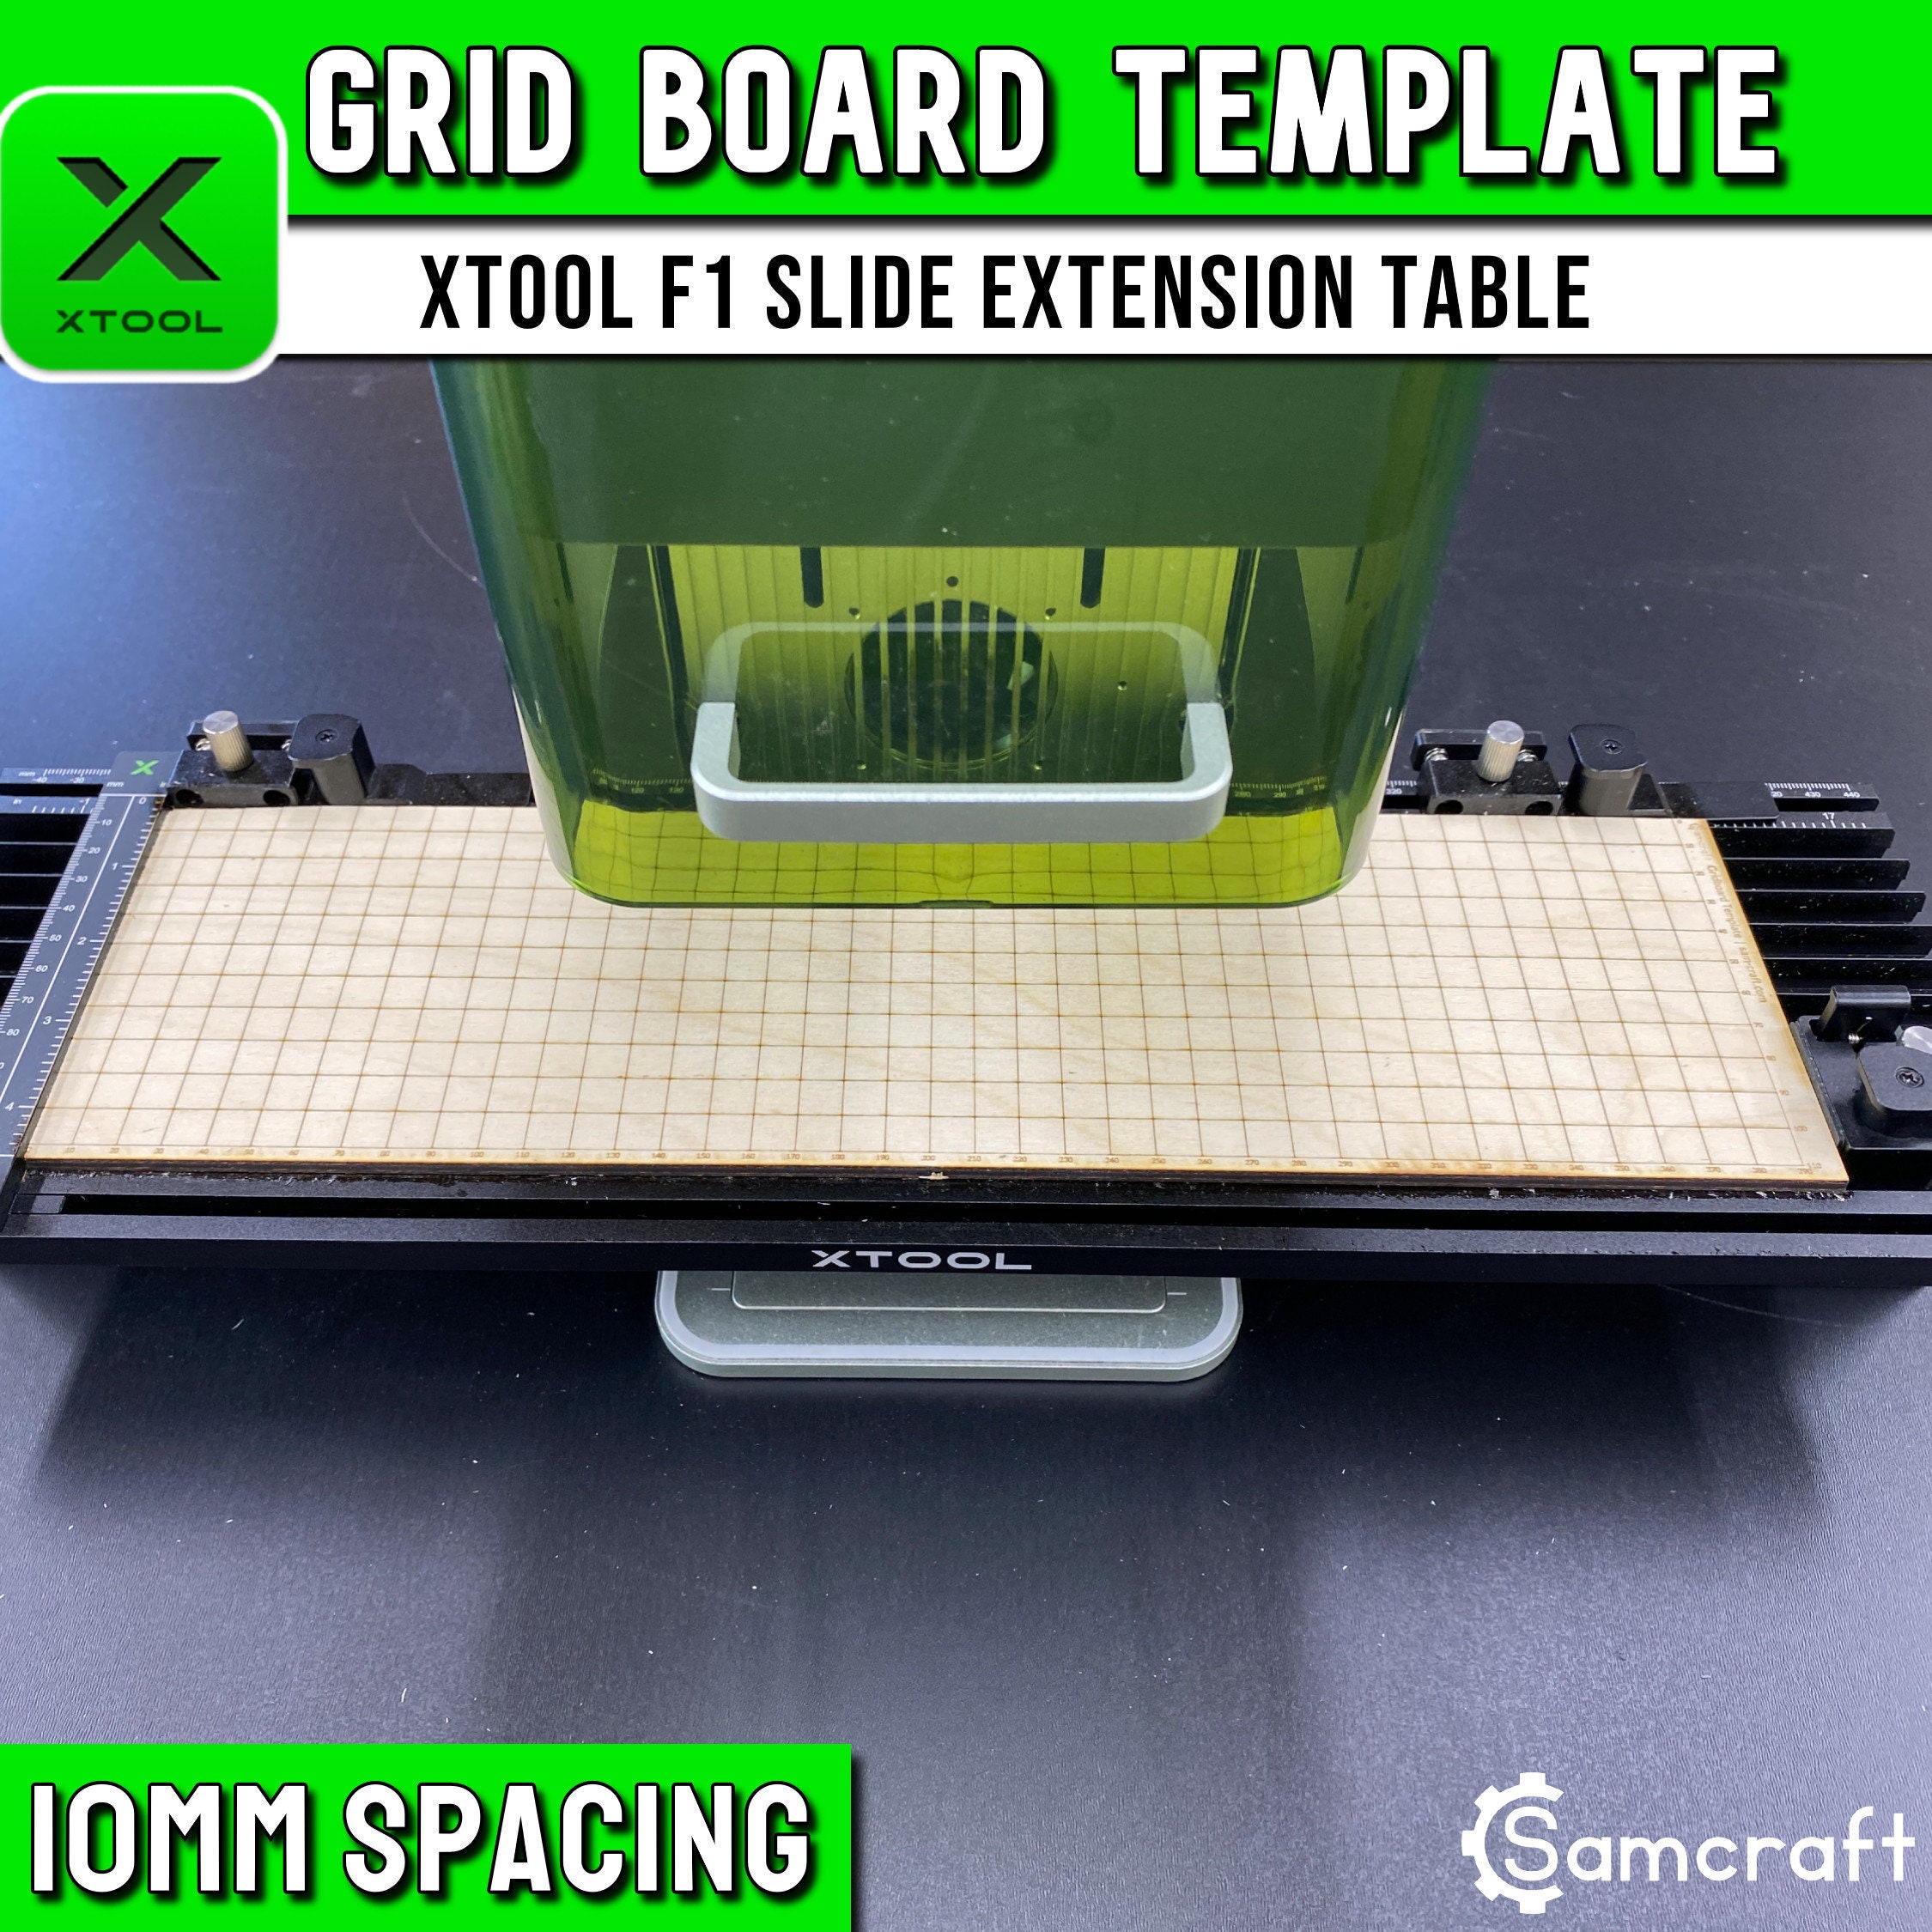 Xtool F1 Gridboard File, Xtool F1 Template, Xtool F1 Slide Extension, Grid  Board Template, XCS File, Laser Engraving File, Samcraft 